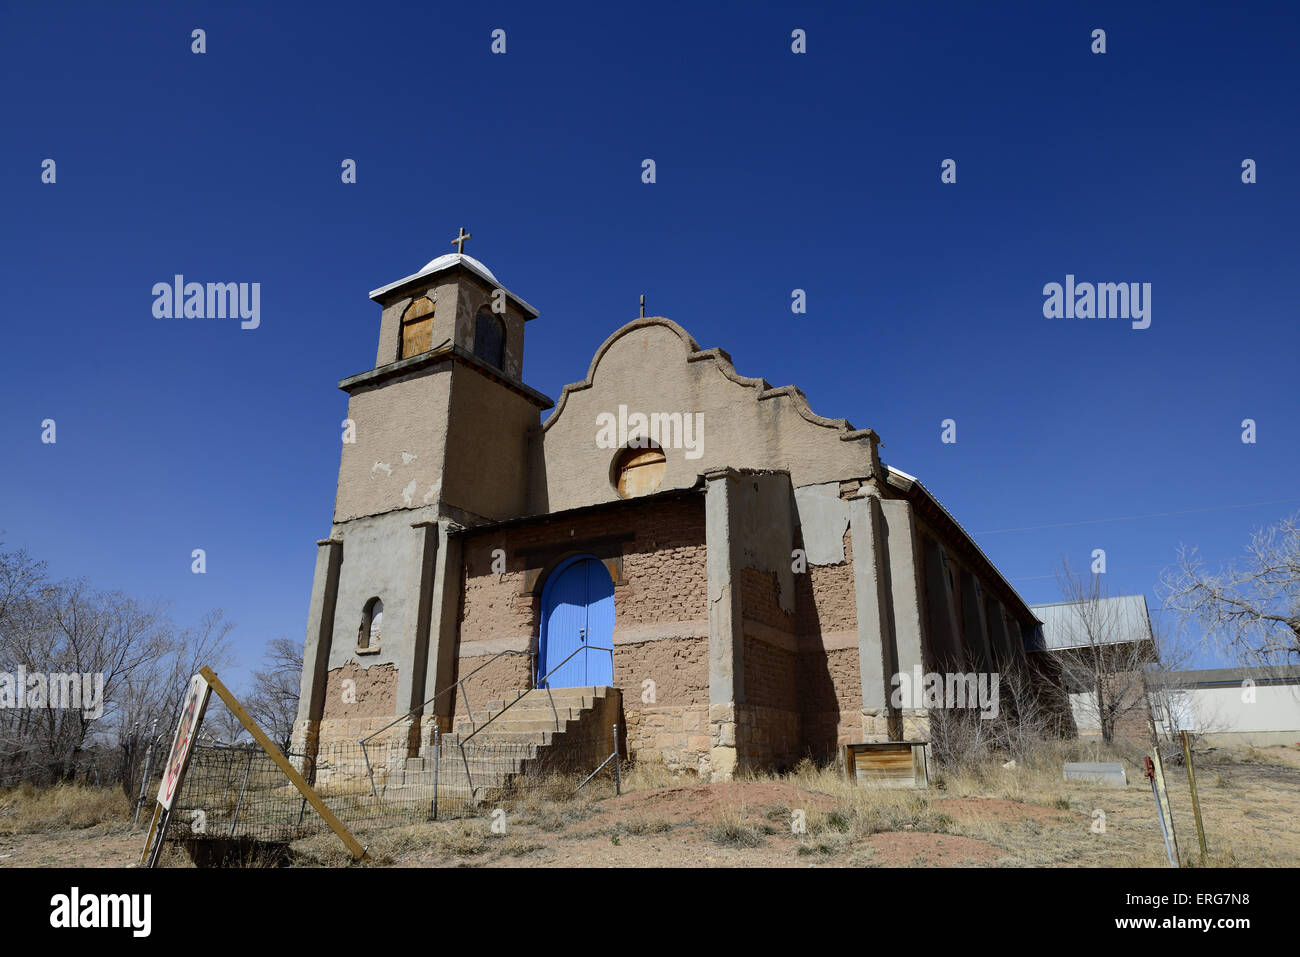 Abandoned adobe style church in Lamy, New Mexico on a sunny day. Stock Photo